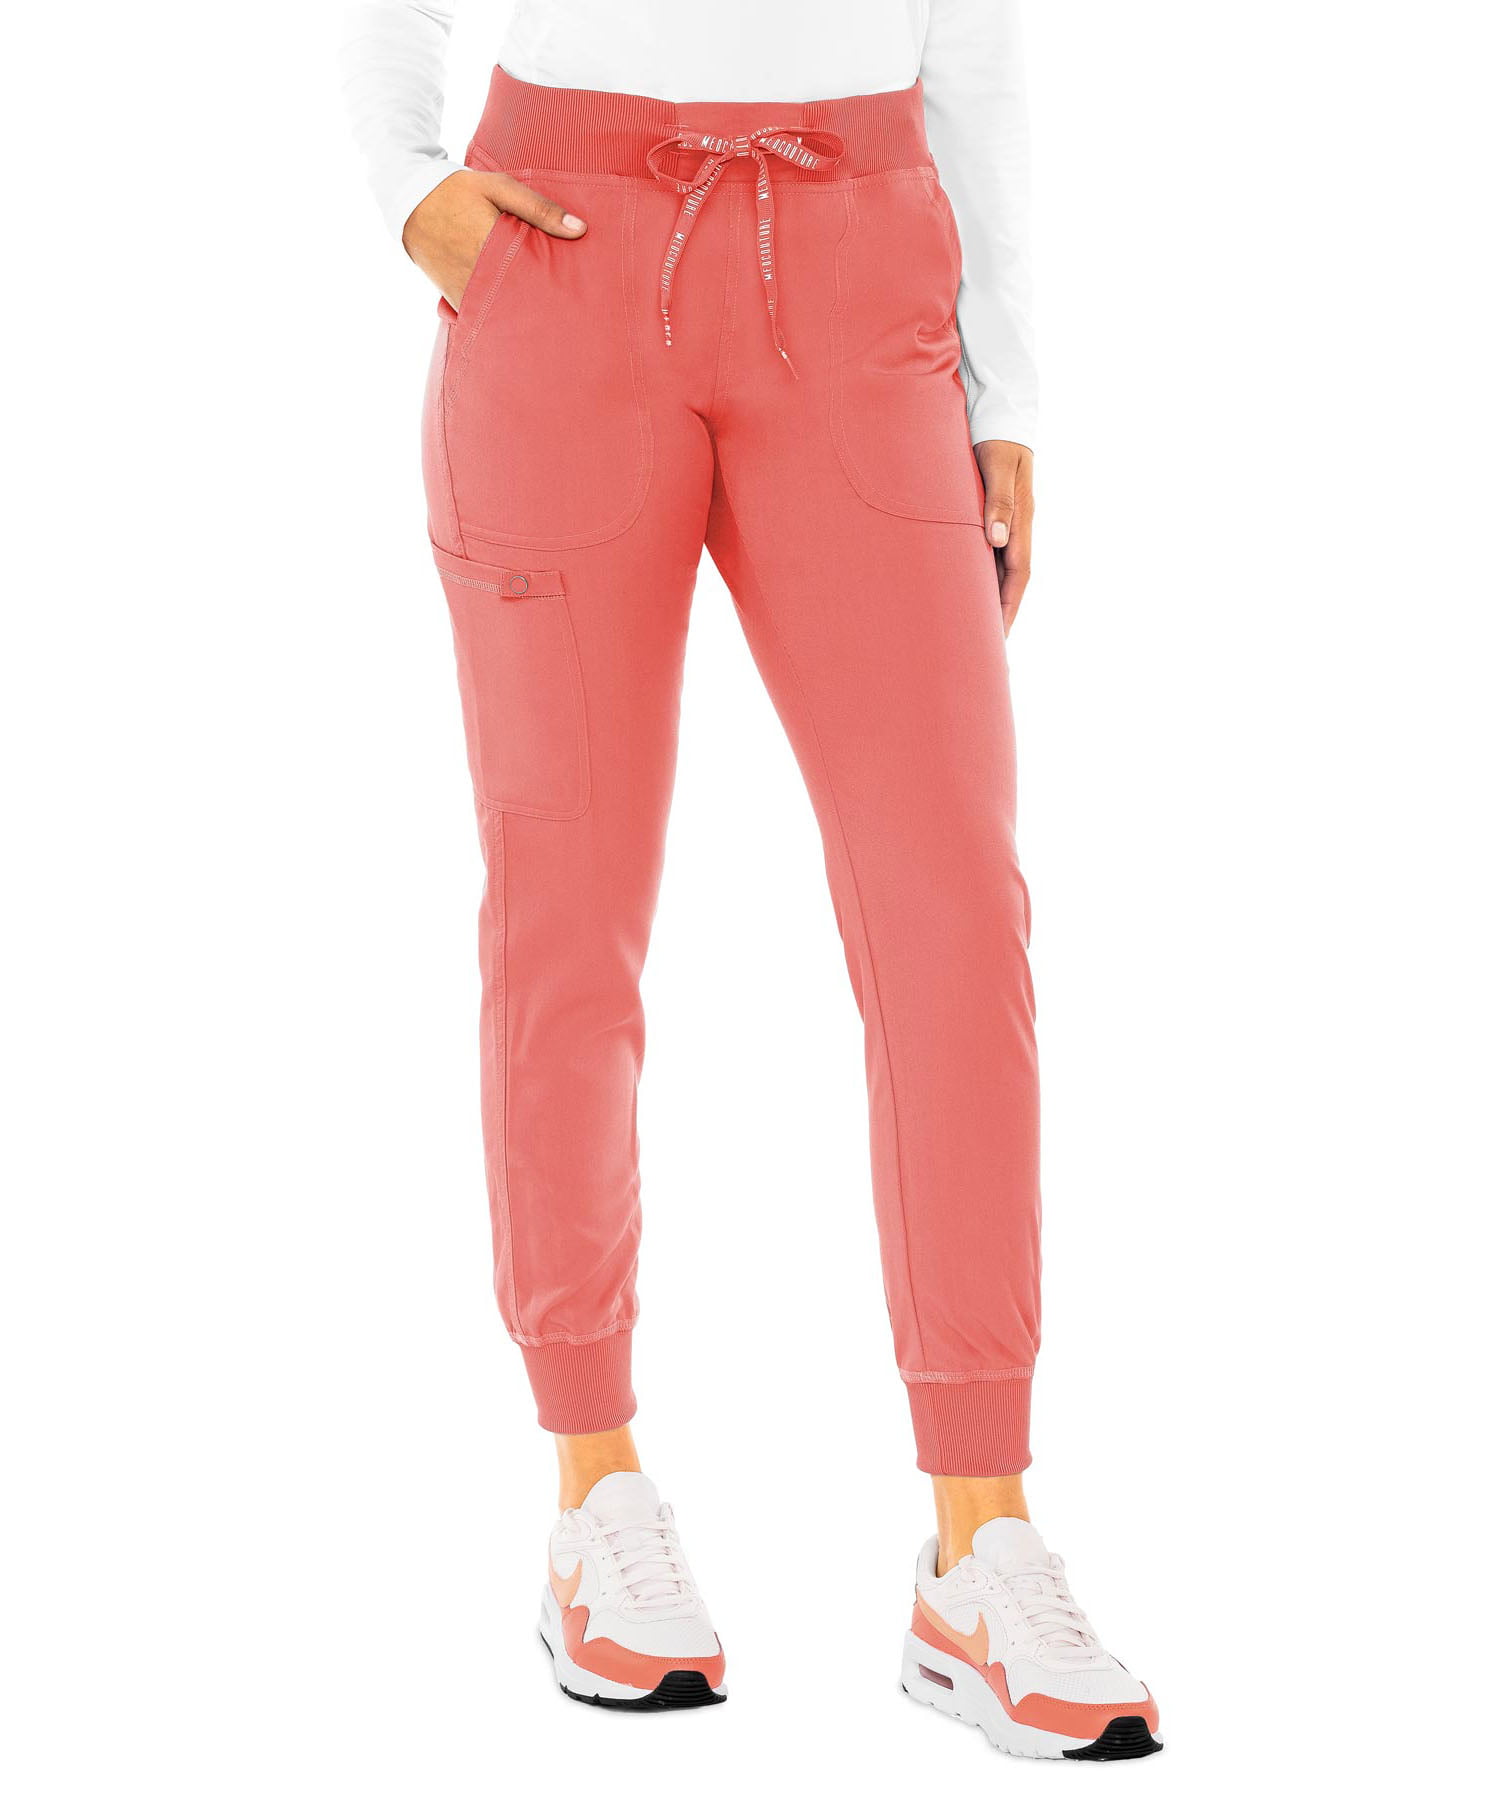 MED COUTURE Women's Touch Jogger Yoga Scrub Pants, Color: Coral, Size: S  Petite 